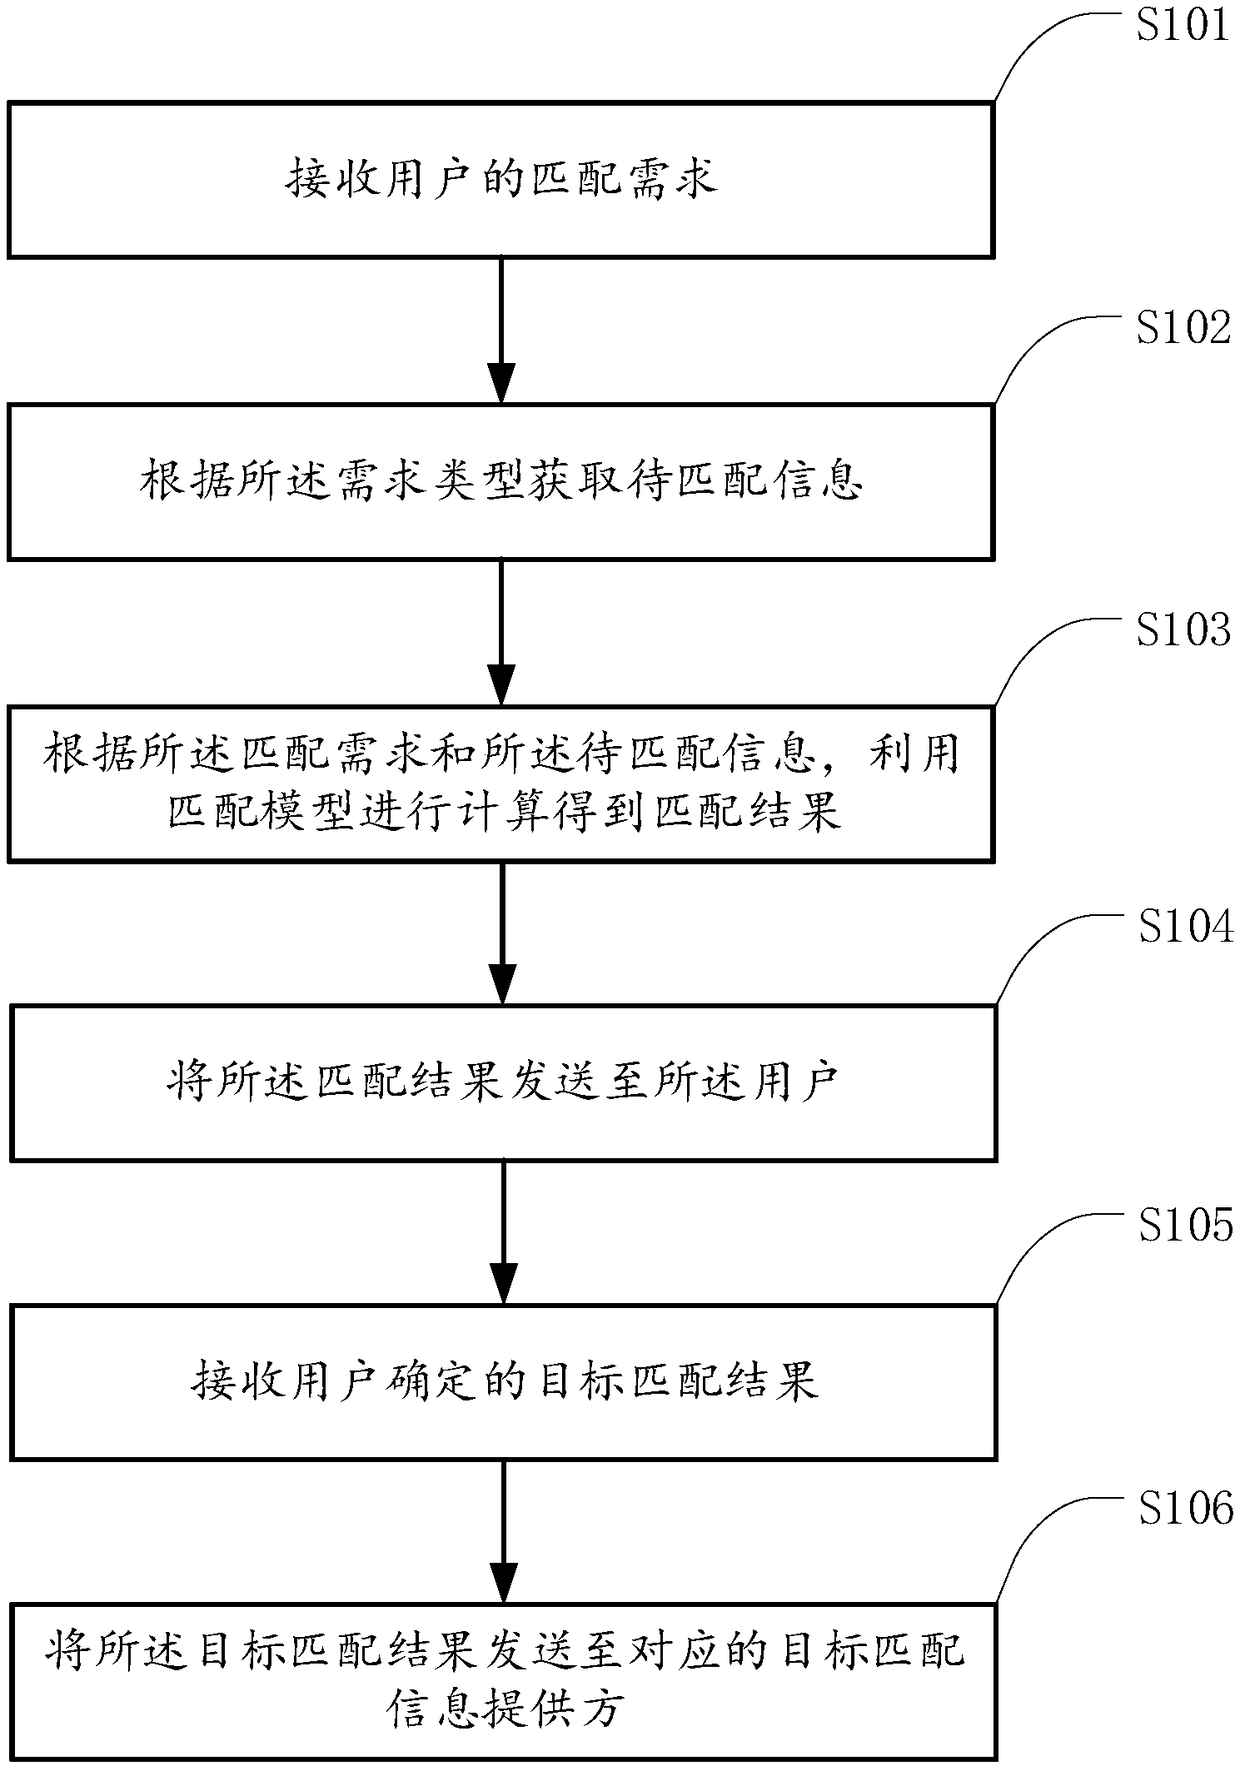 An information matching method and related equipment